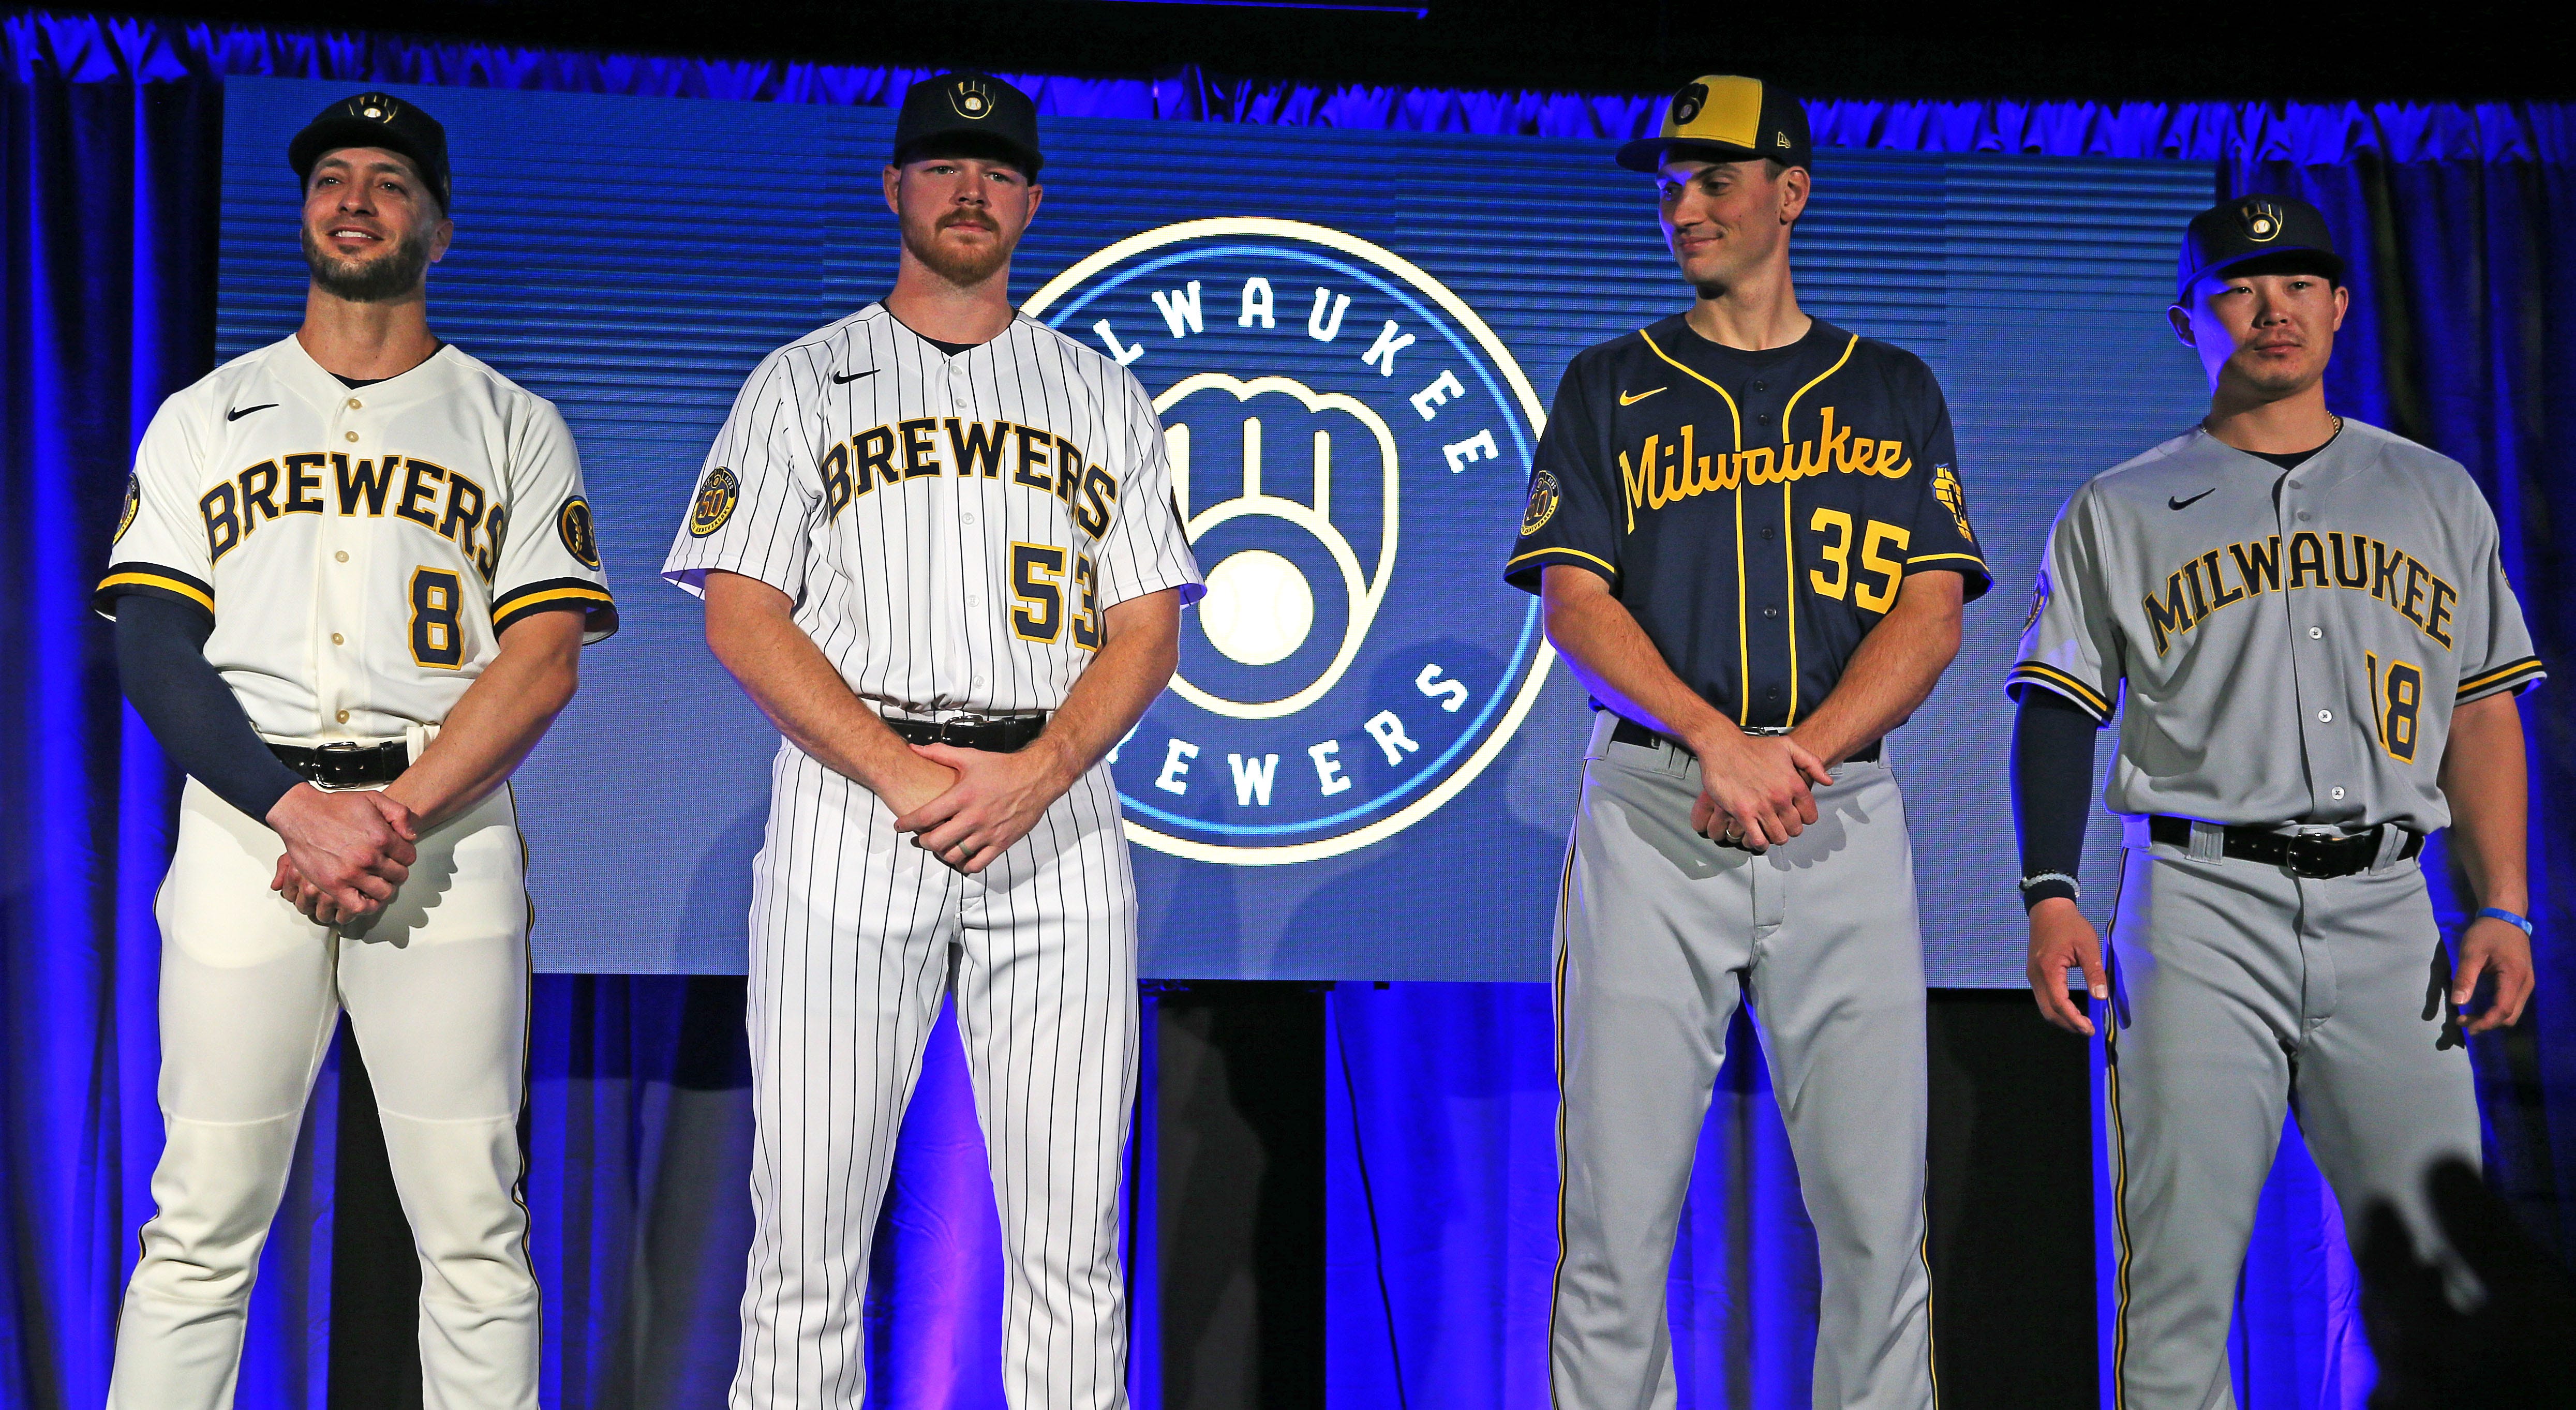 new brewers uniforms 2020